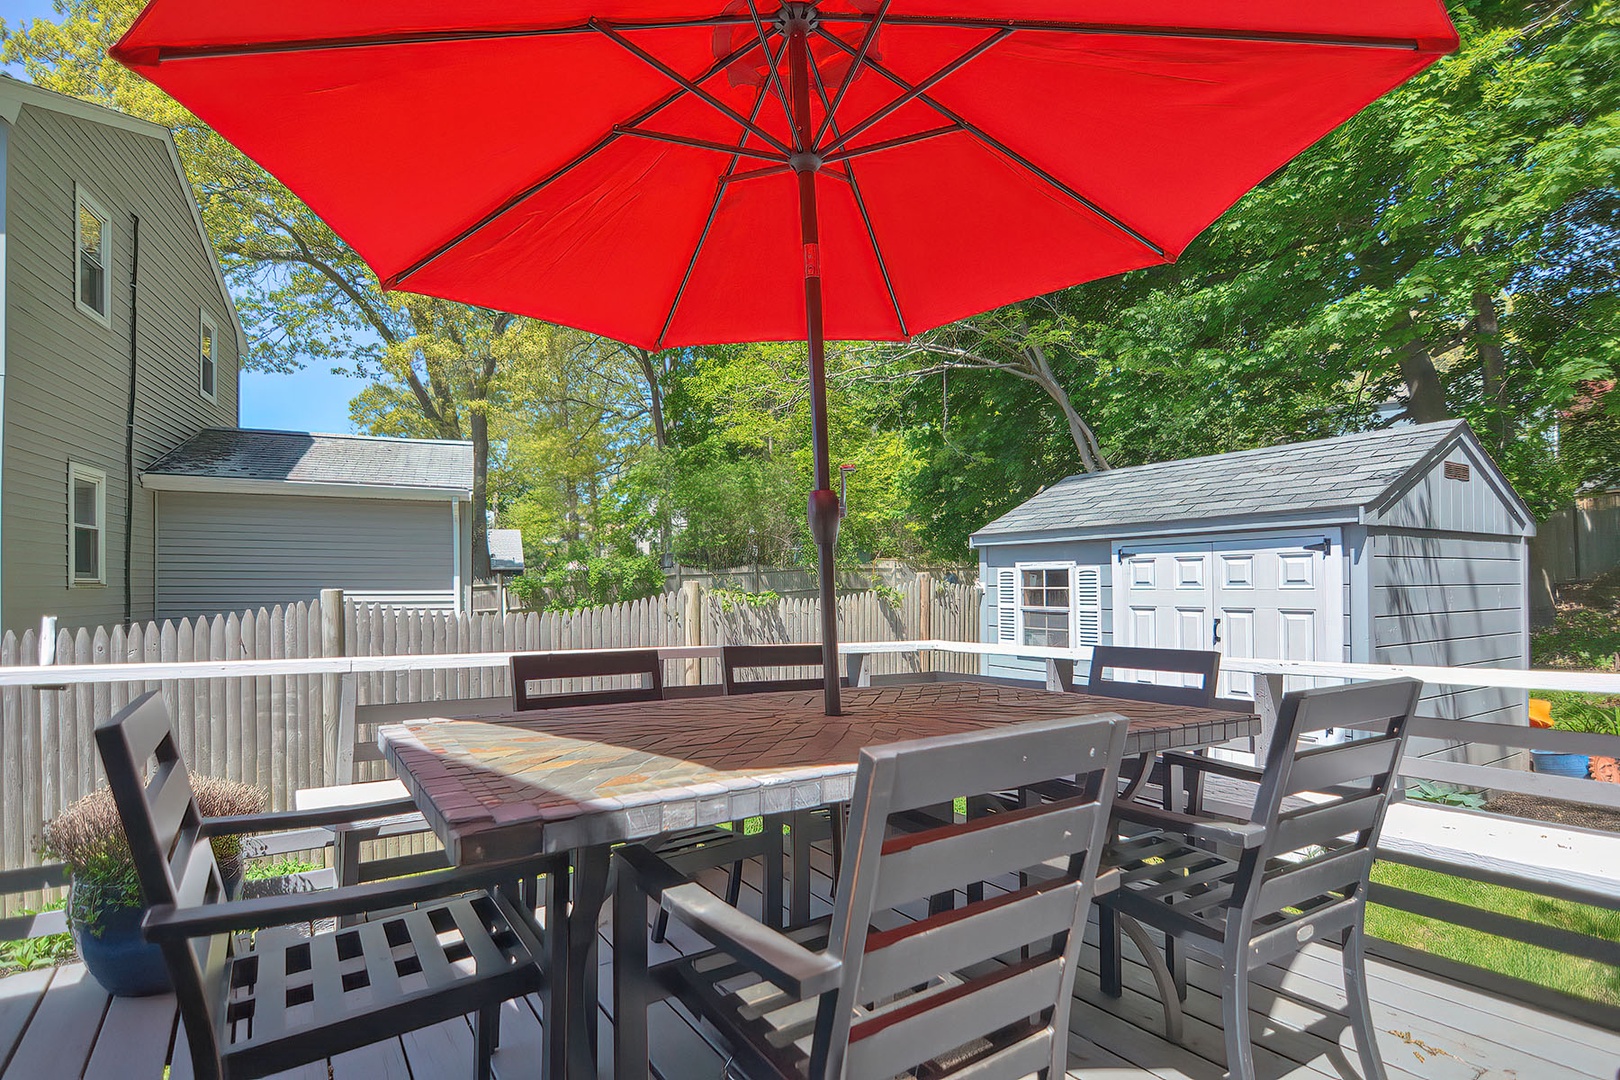 Enjoy dining or relaxing on the back deck.